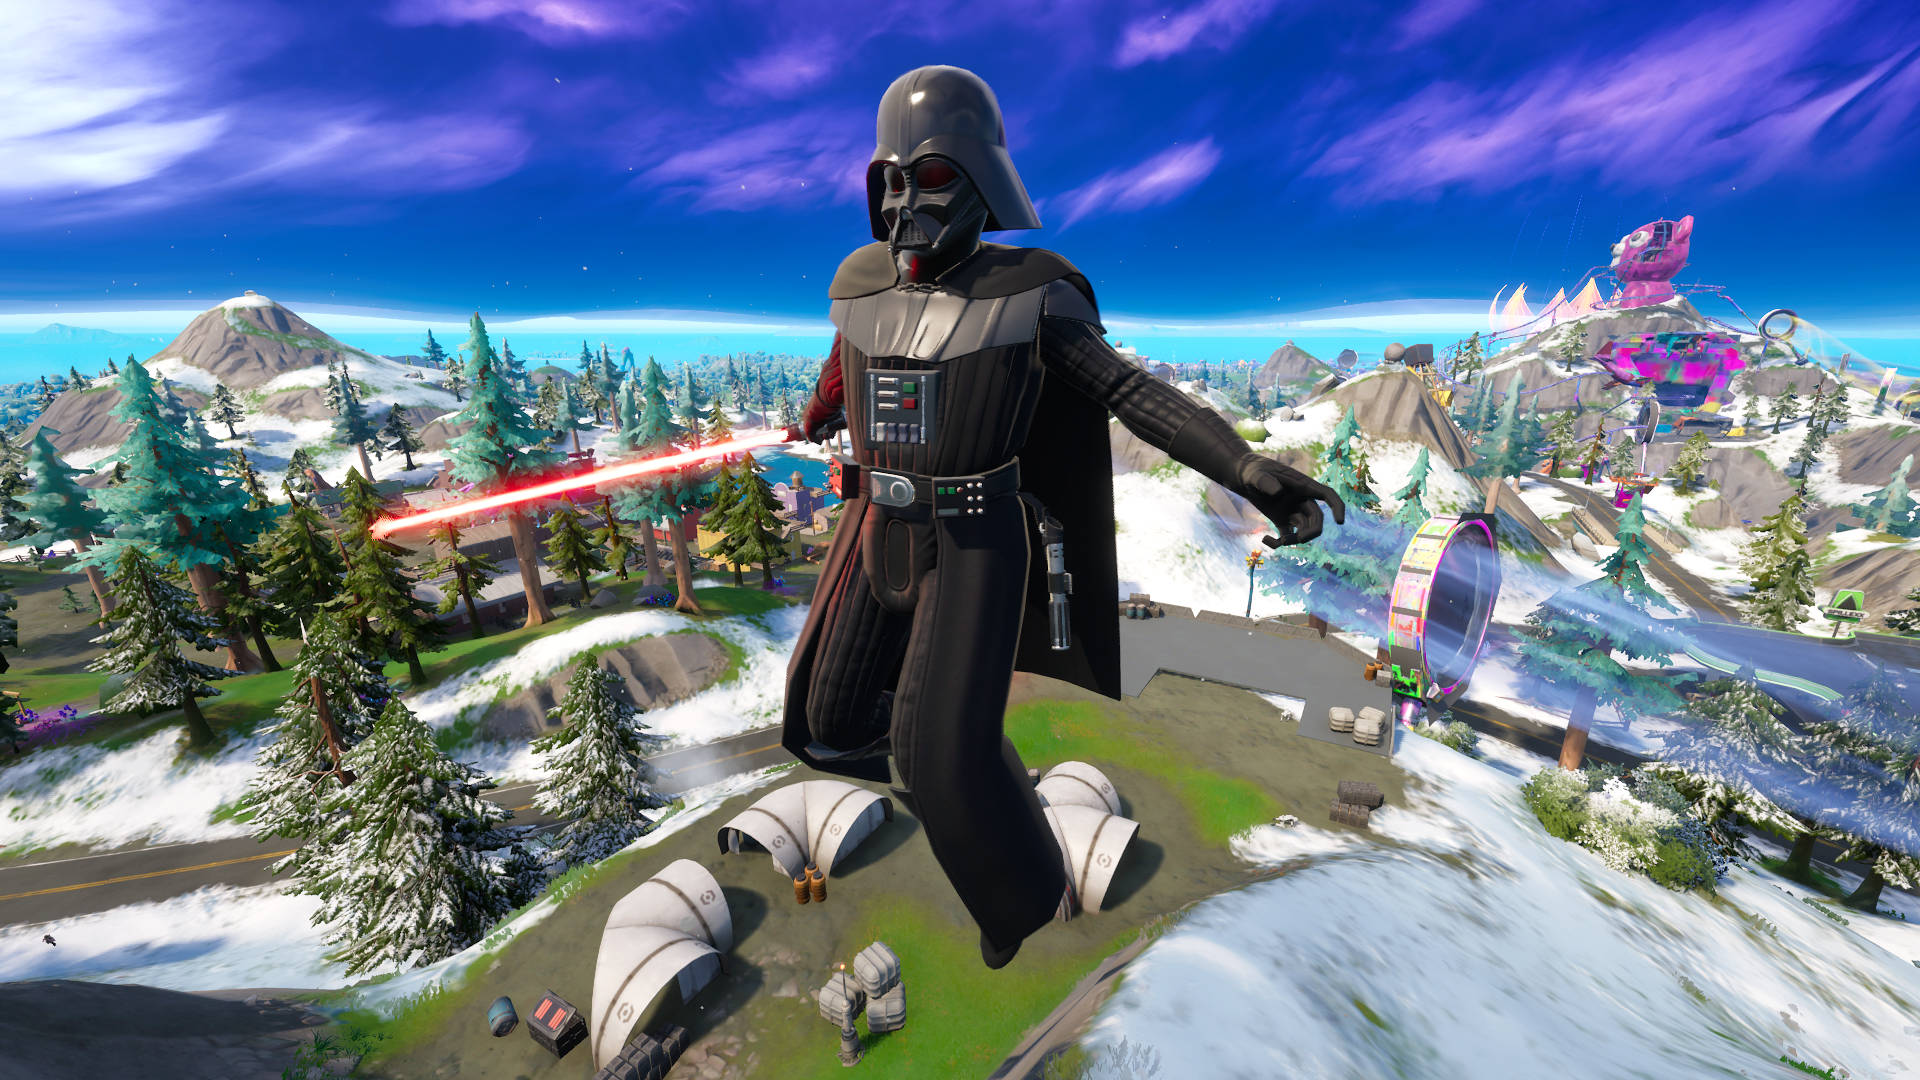 Fortnite Darth Vader boss location and how to get his lightsaber